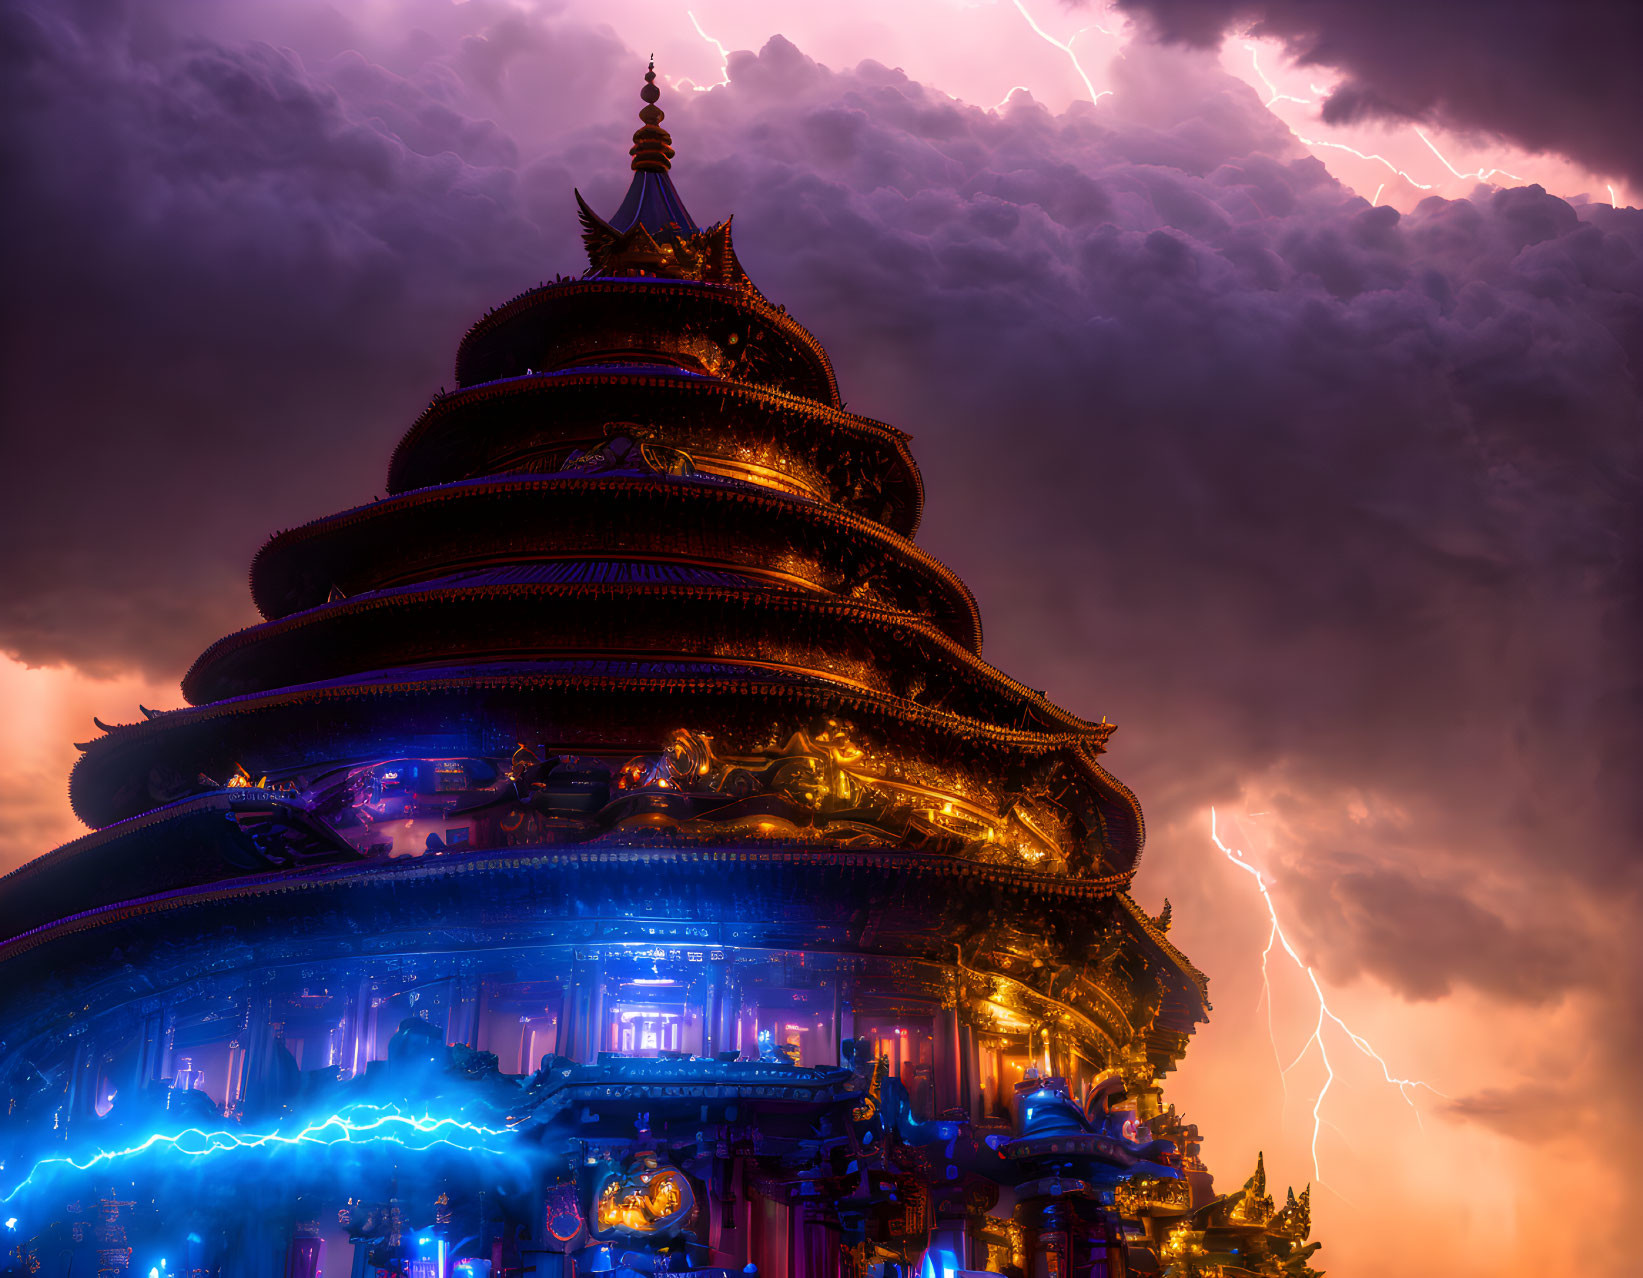 Majestic multi-tiered pagoda with neon lights under dramatic purple sky